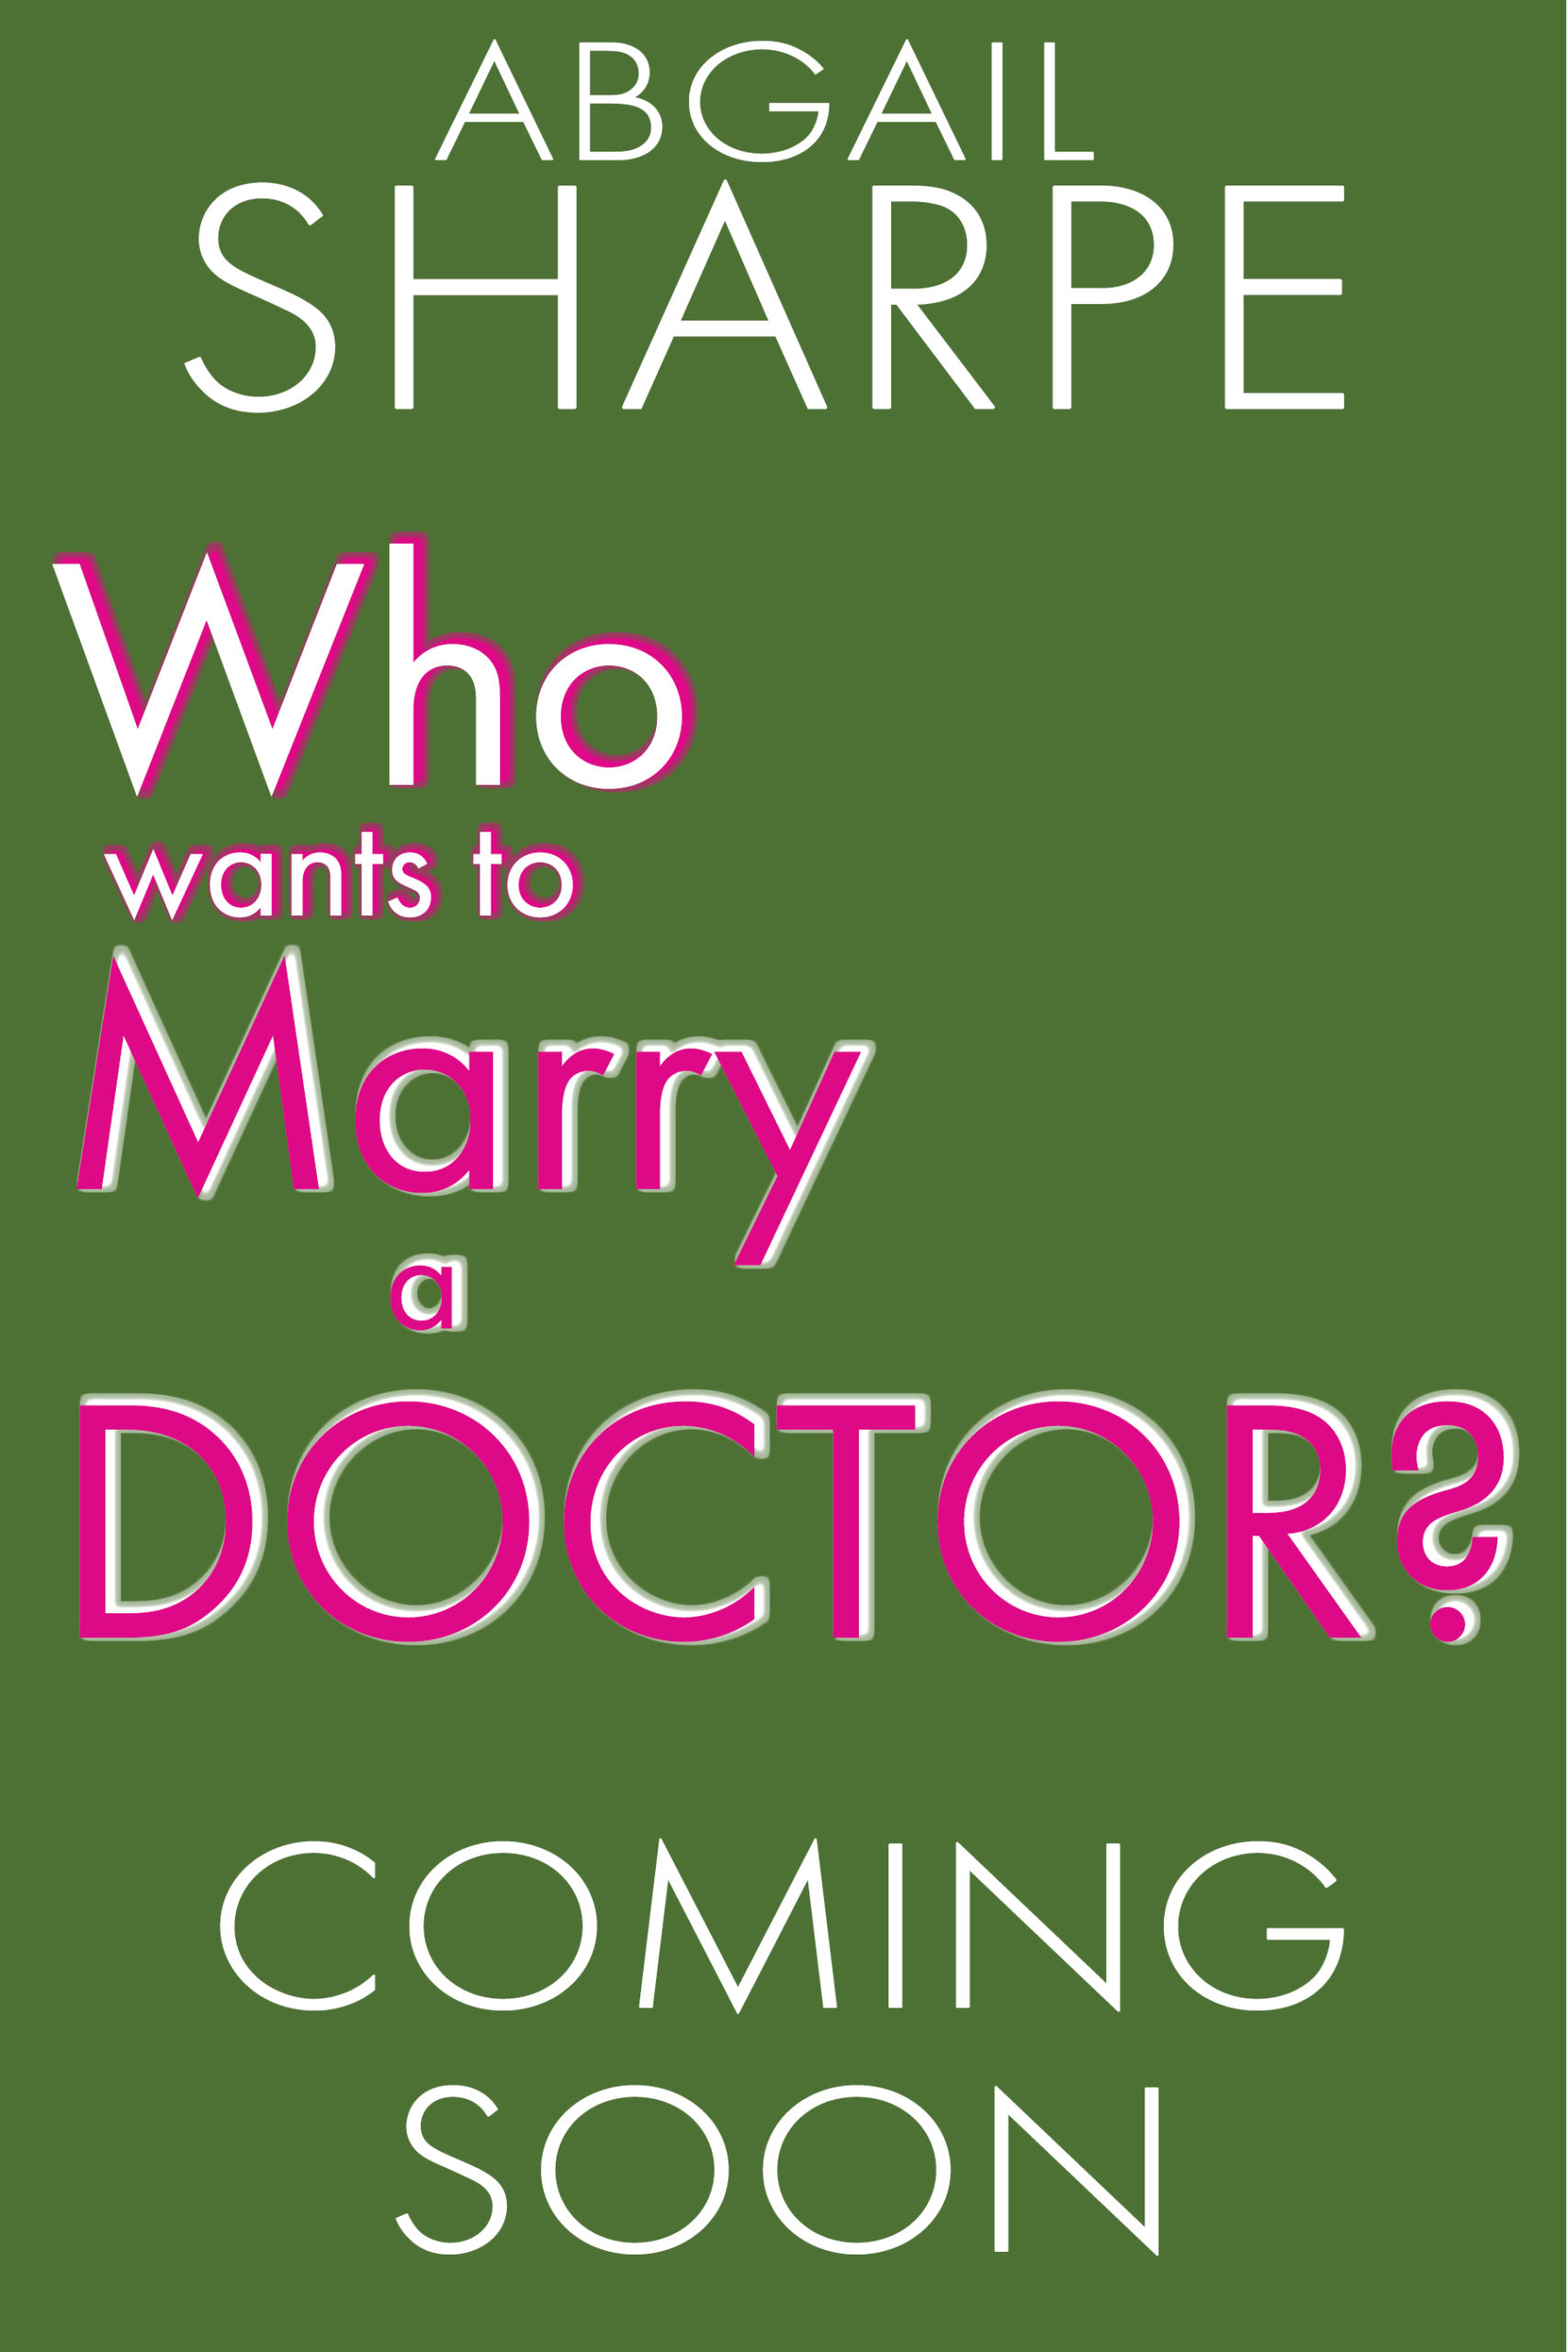 Who Wants to Marry a Doctor?